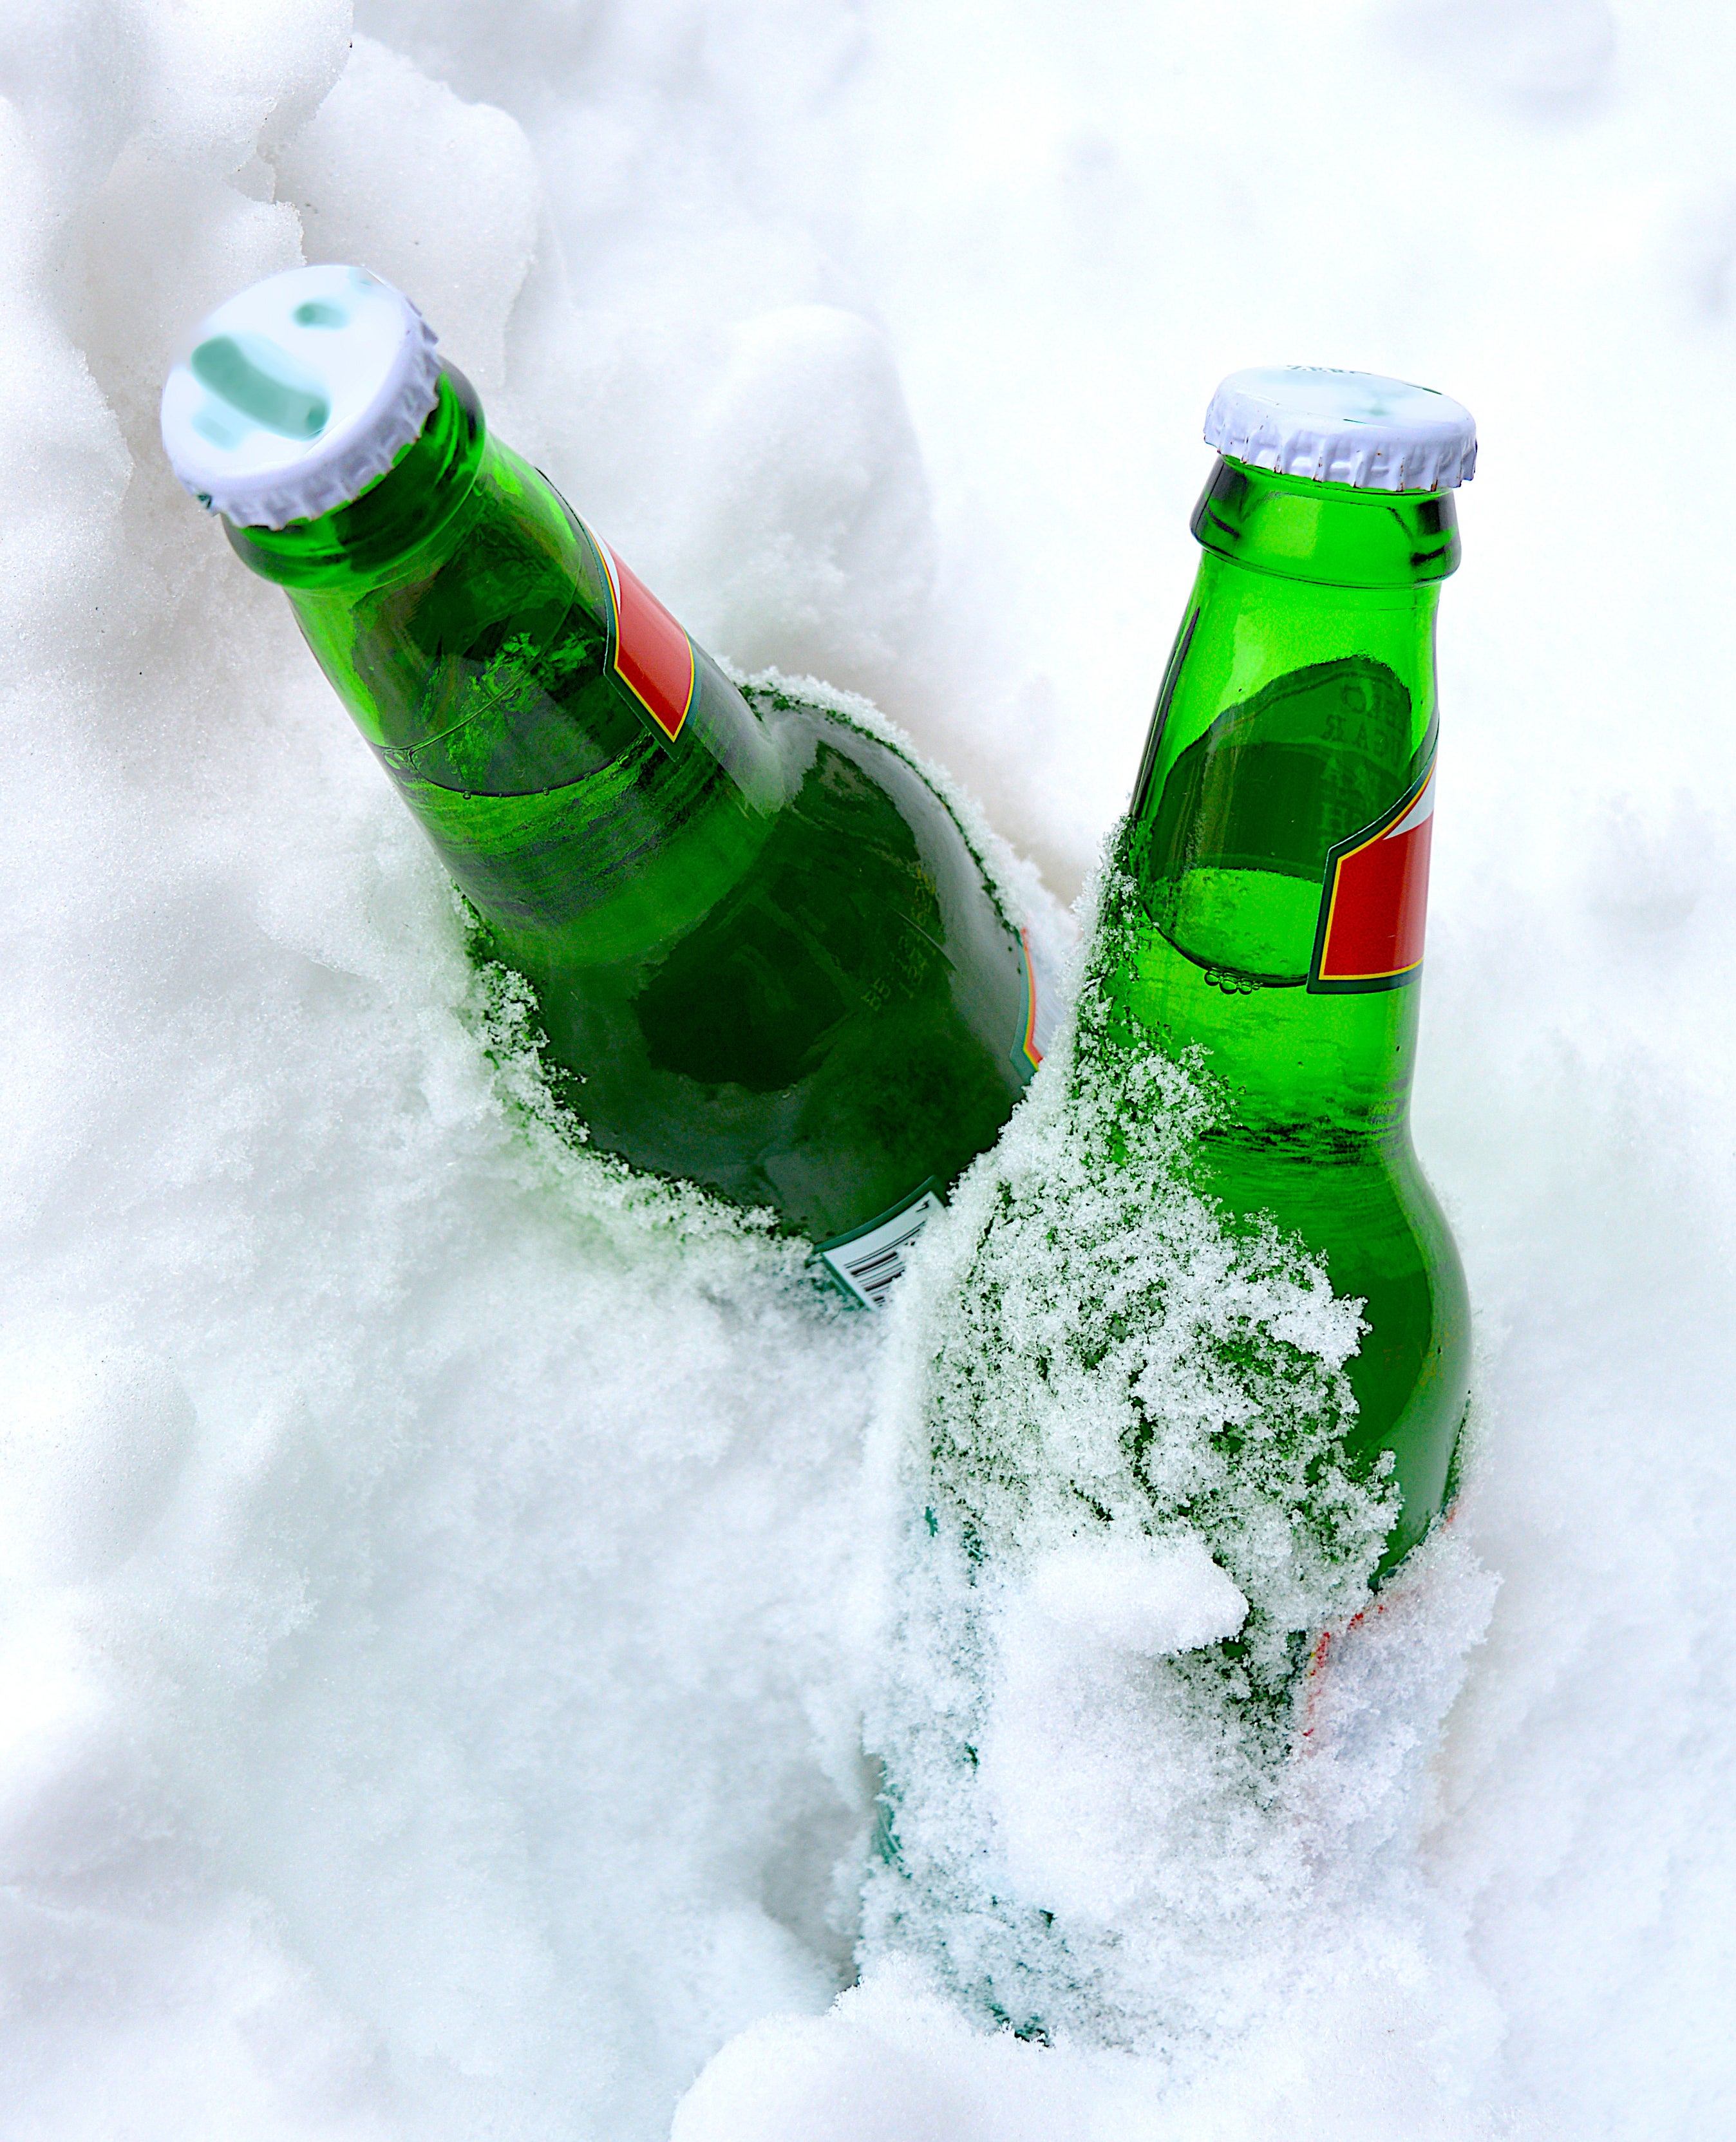 Two bottles of beer packed into snow to keep cool.